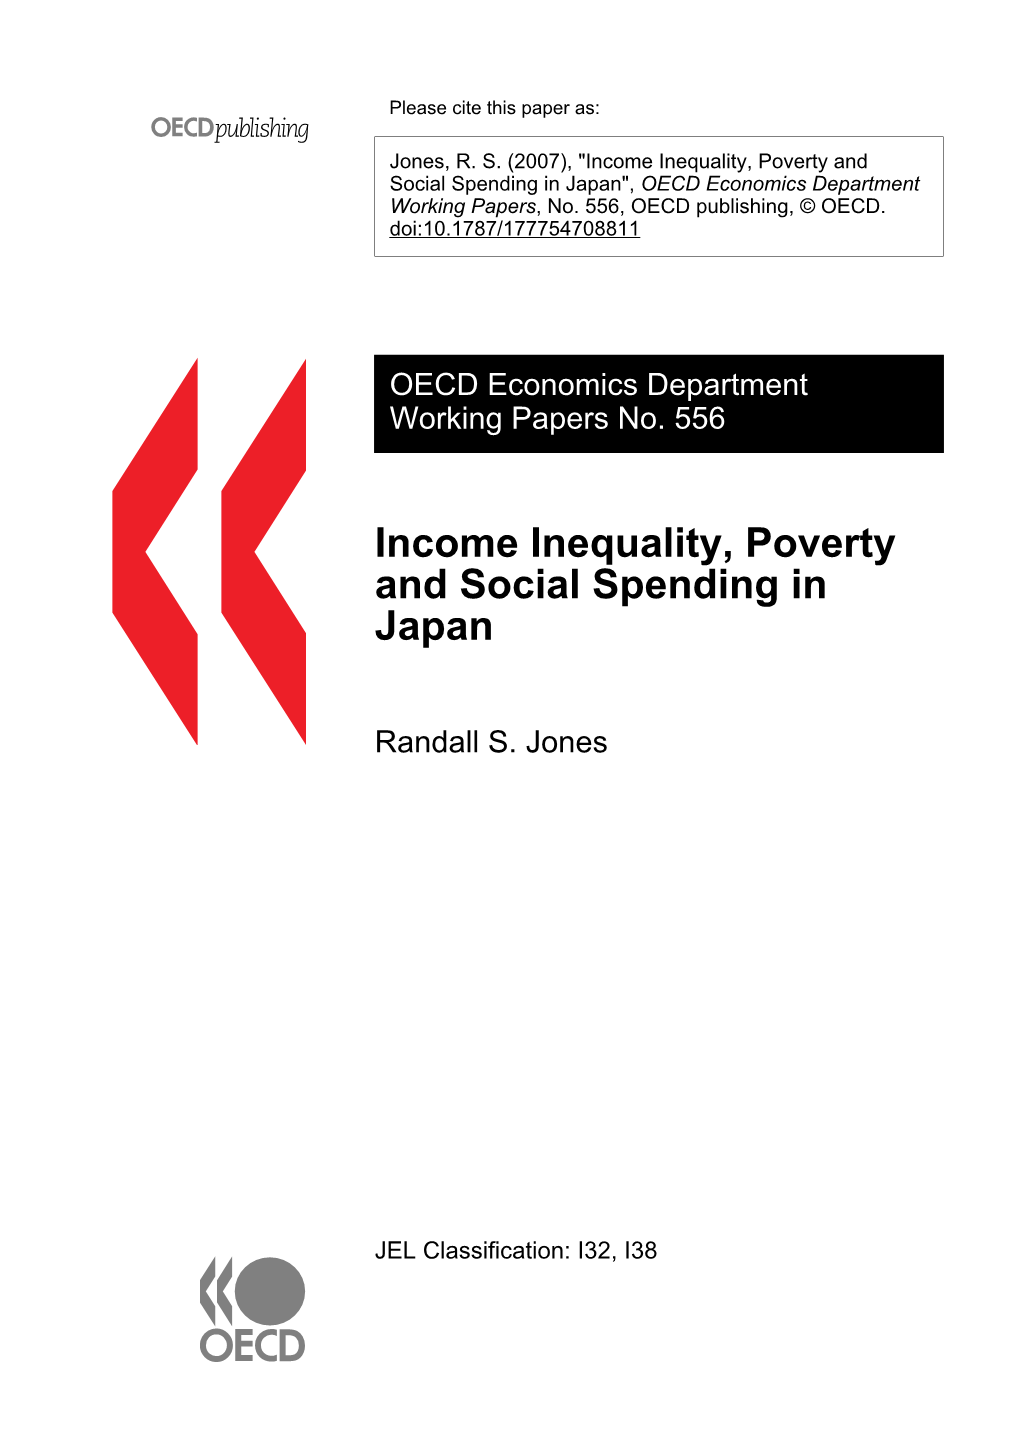 Income Inequality, Poverty and Social Spending in Japan", OECD Economics Department Working Papers, No